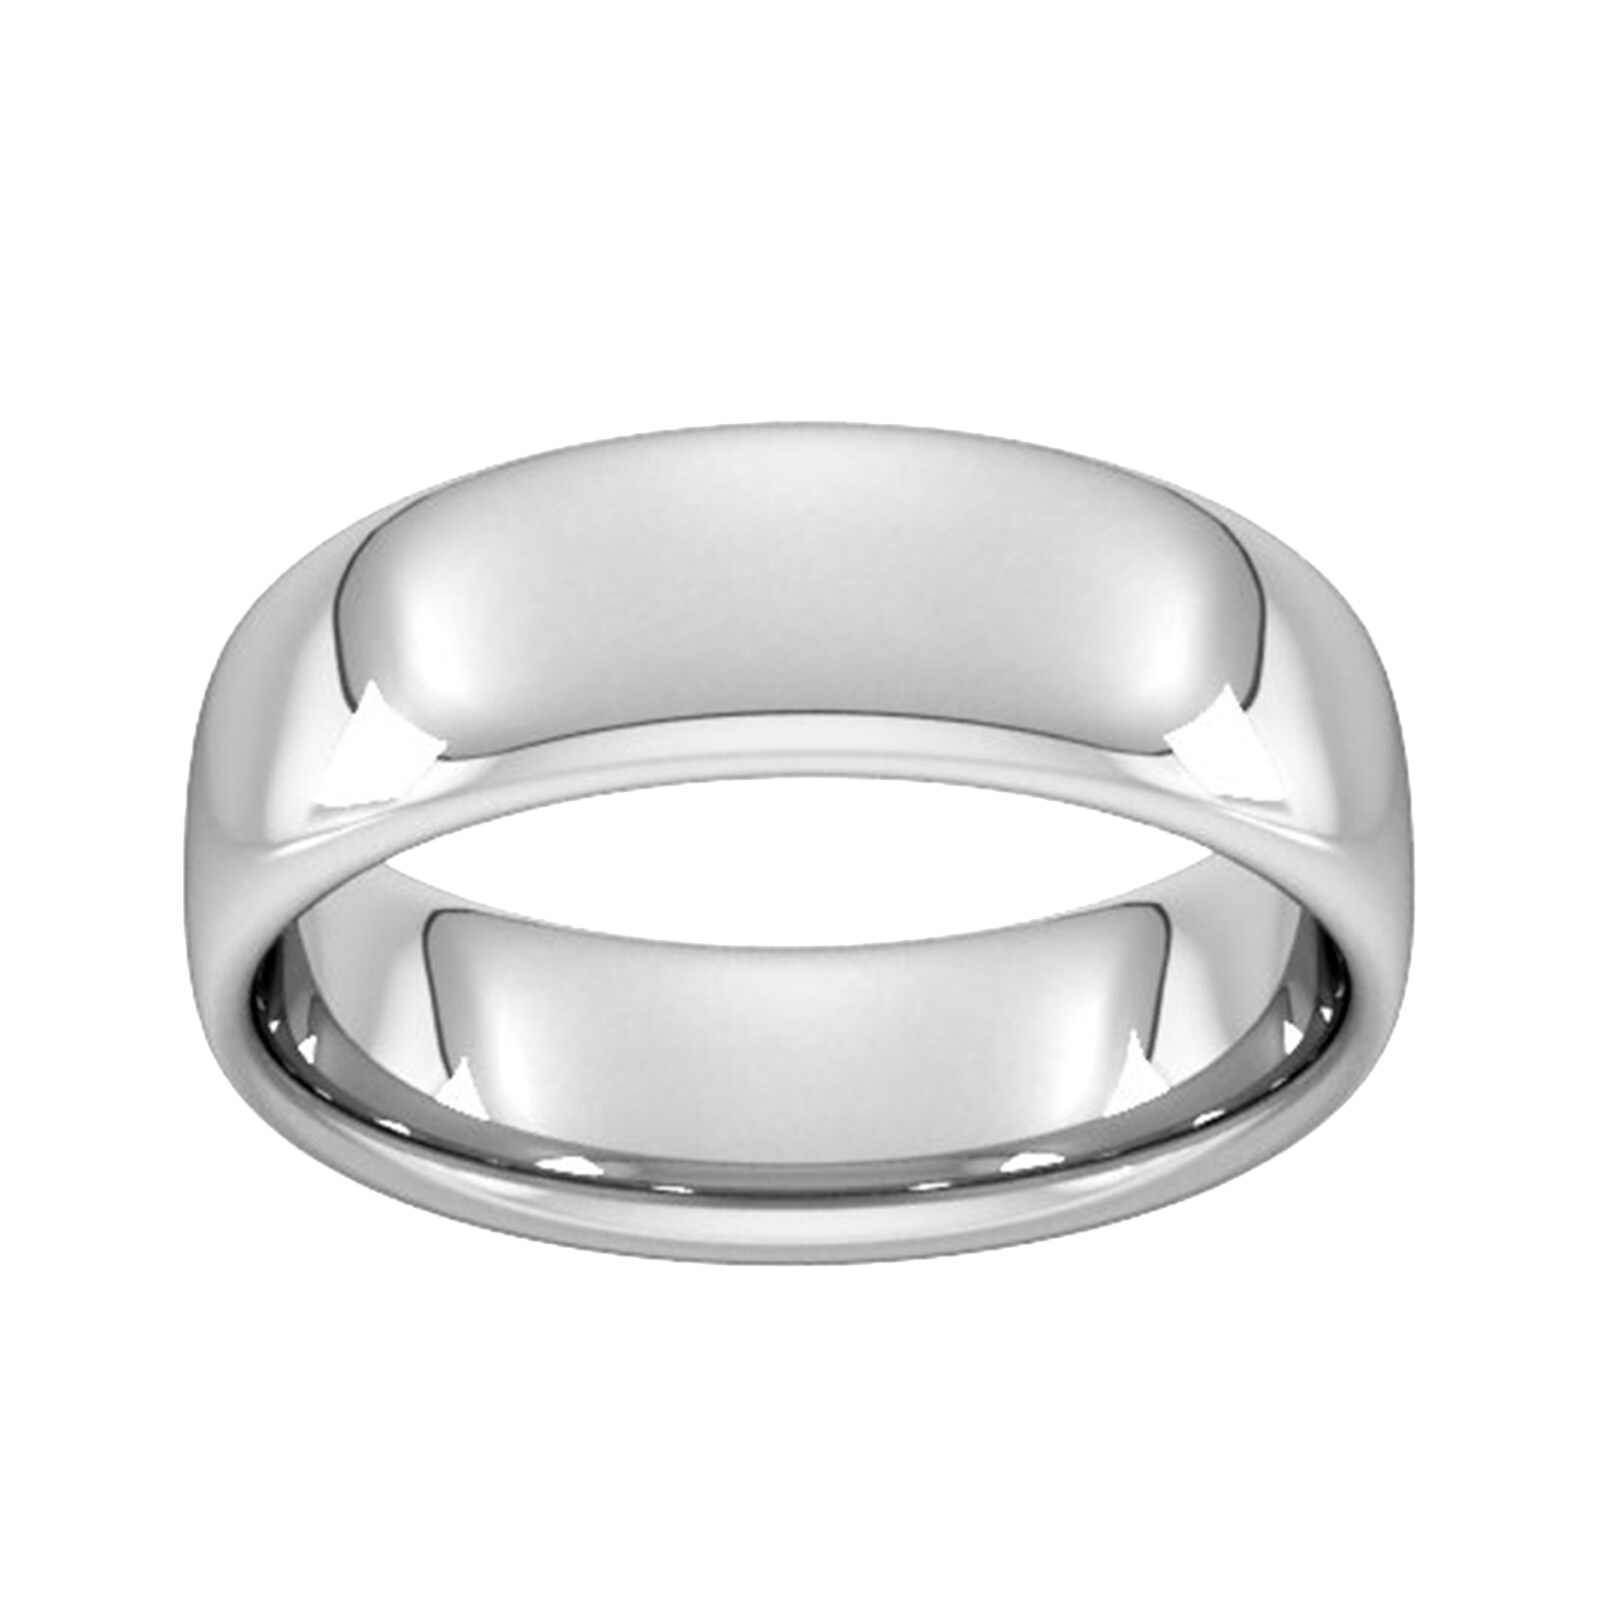 7mm Slight Court Heavy Wedding Ring In 9 Carat White Gold - Ring Size L